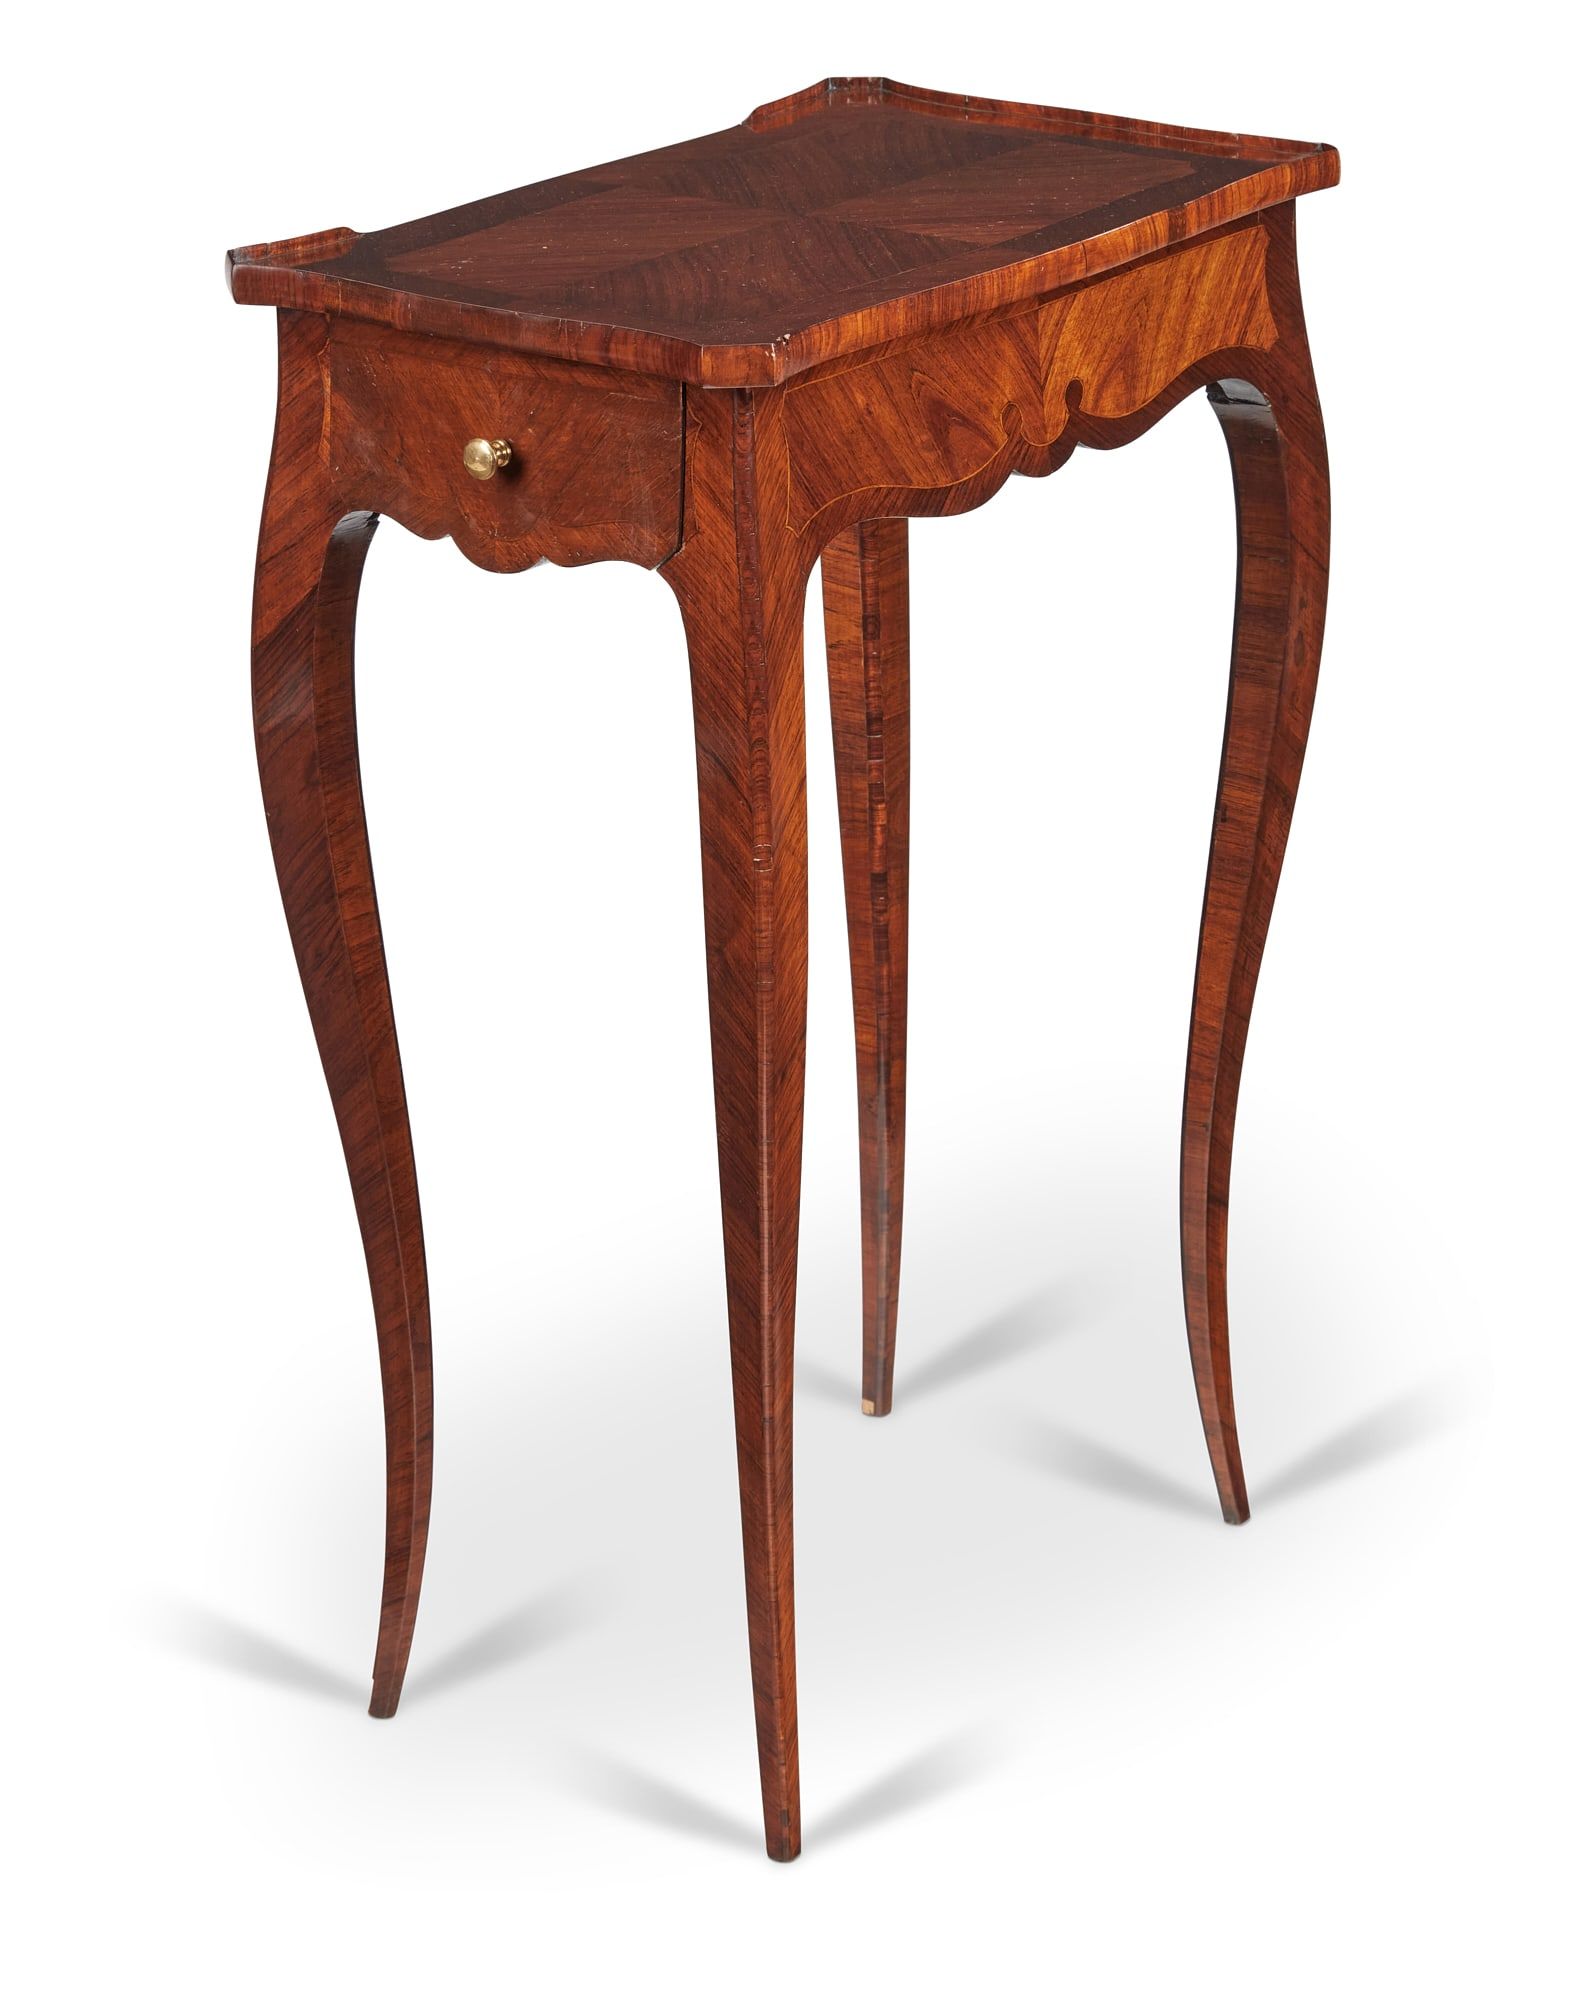 A LOUIS XV STYLE KINGWOOD AND TULIPWOOD